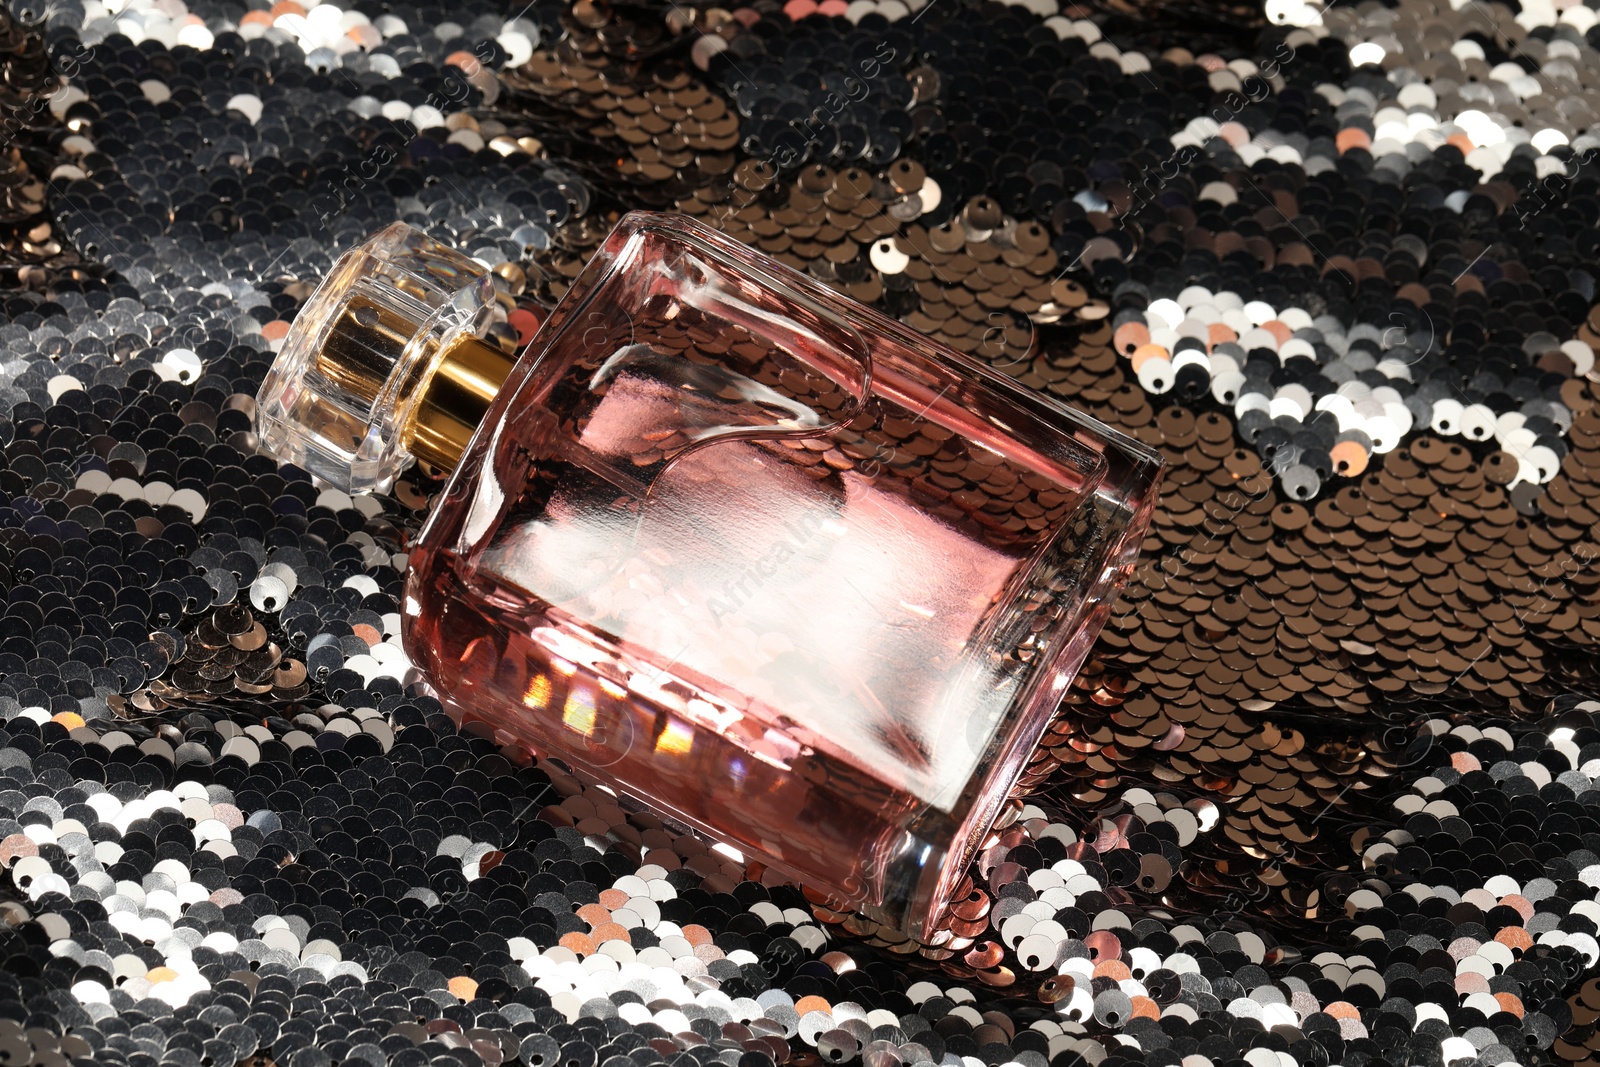 Photo of Luxury perfume in bottle on fabric with silver sequins, above view